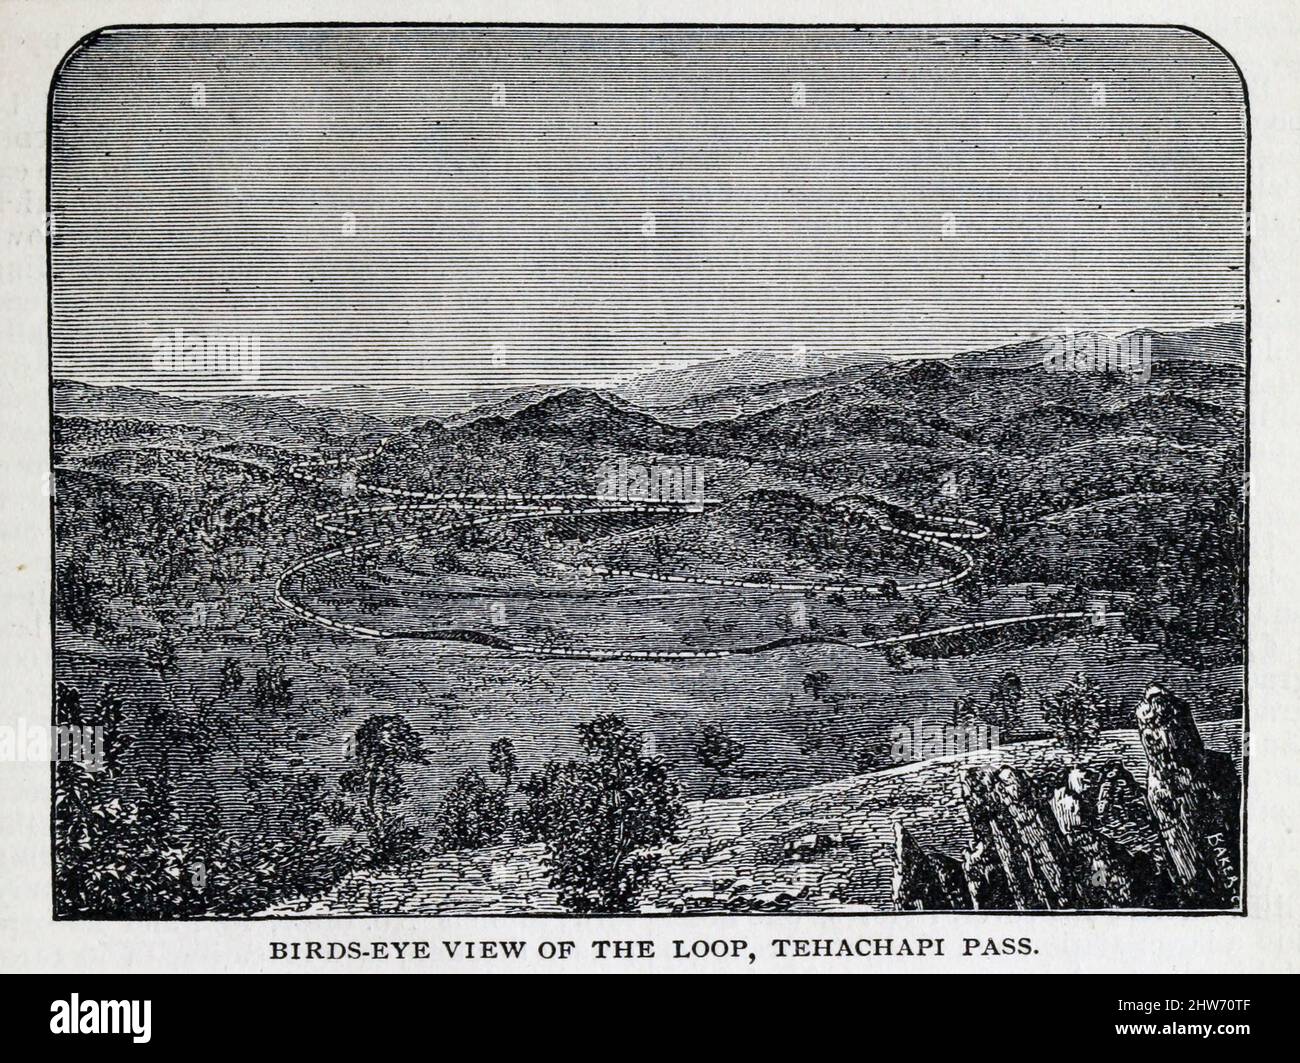 BIRDS-EYE VIEW OF THE LOOP, TEHACHAPI PASS from the book Crofutt's new overland tourist and Pacific coast guide : containing description cities, towns, villages, stations, government fort and camps, mountains, lakes, rivers, sulphur, soda and hot springs, scenery, watering places, and summer resorts : where to look for and hunt the buffalo, antelope, deer and other game; trout fishing, through Nebraska, Wyoming, Colorado, Utah, Montana, Idaho, Nevada, California and Arizona by George A Crofutt, Published in Chicago, Ill., by The Overland Pub. Co in 1879 Stock Photo